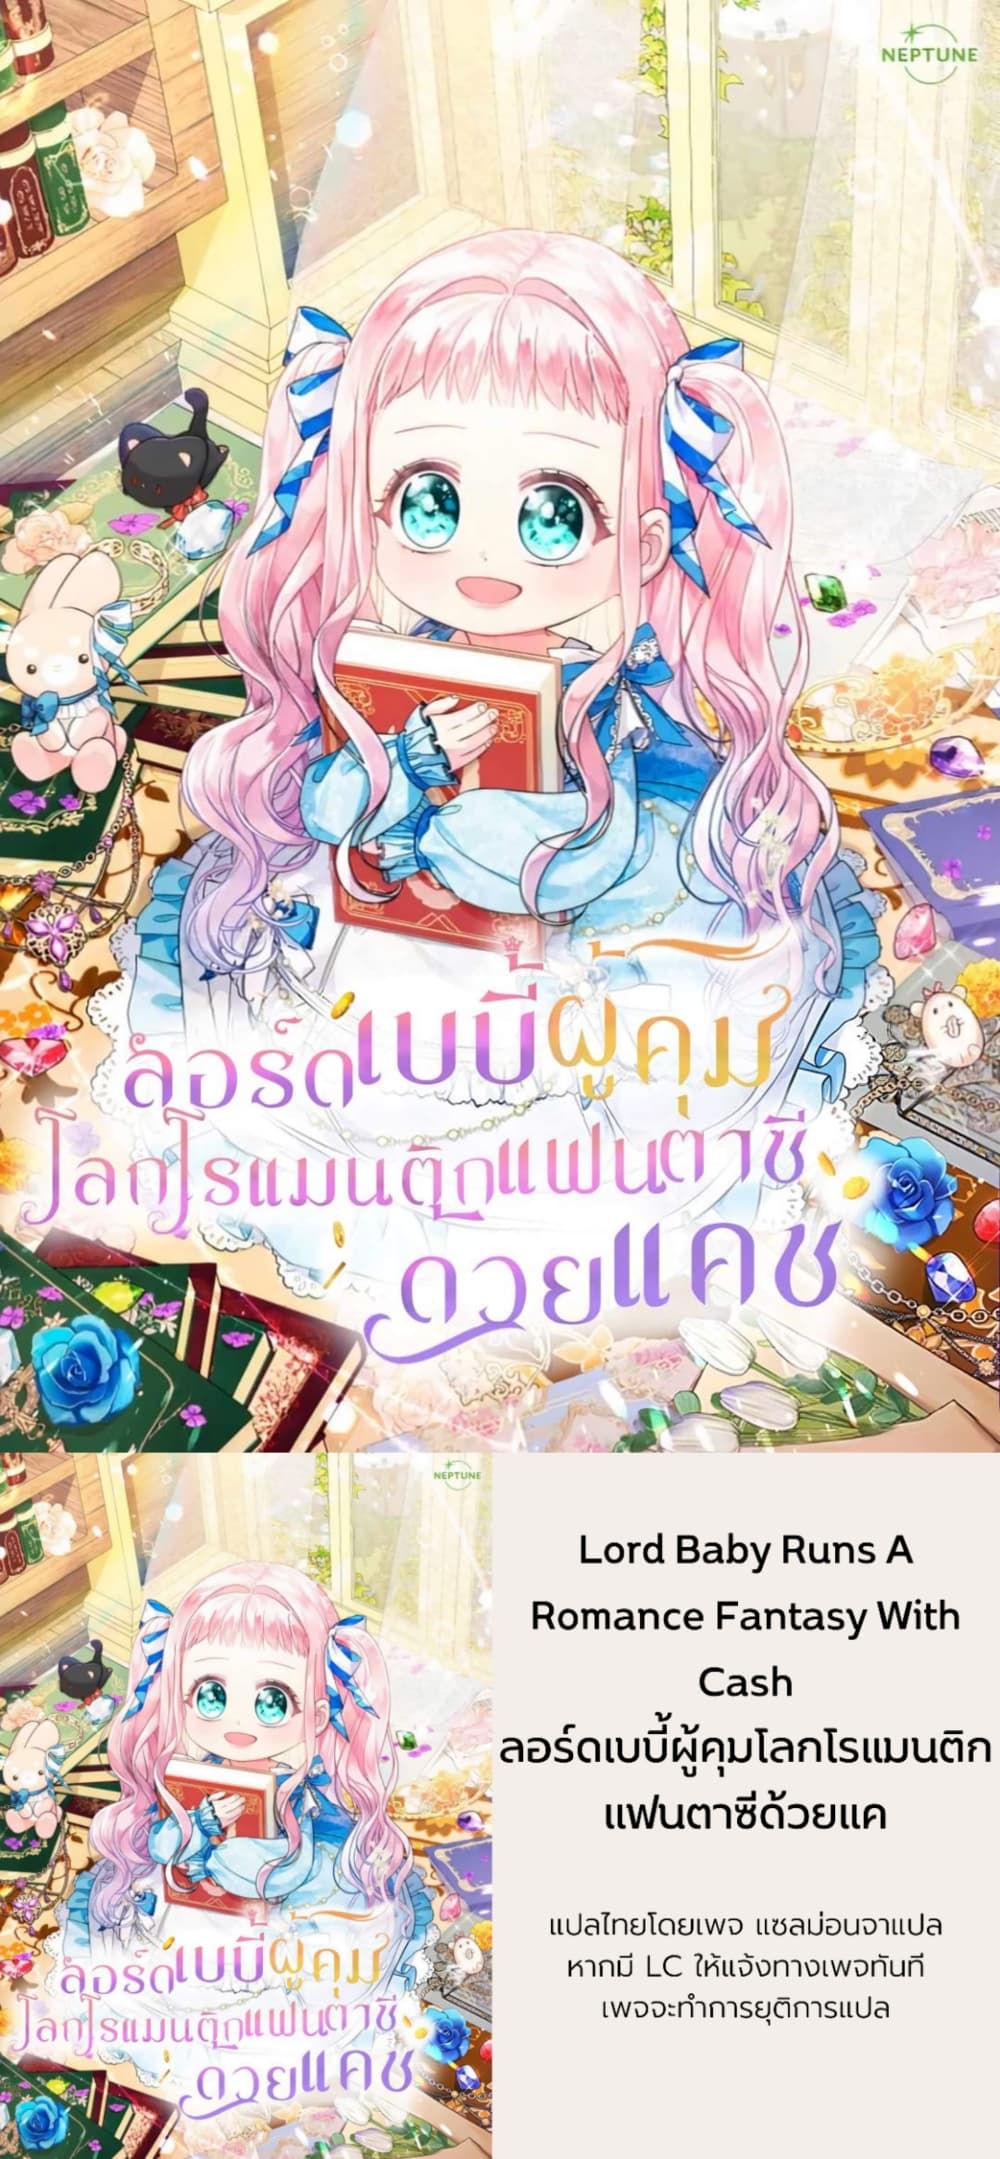 Lord Baby Runs a Romance Fantasy With Cash 9-9